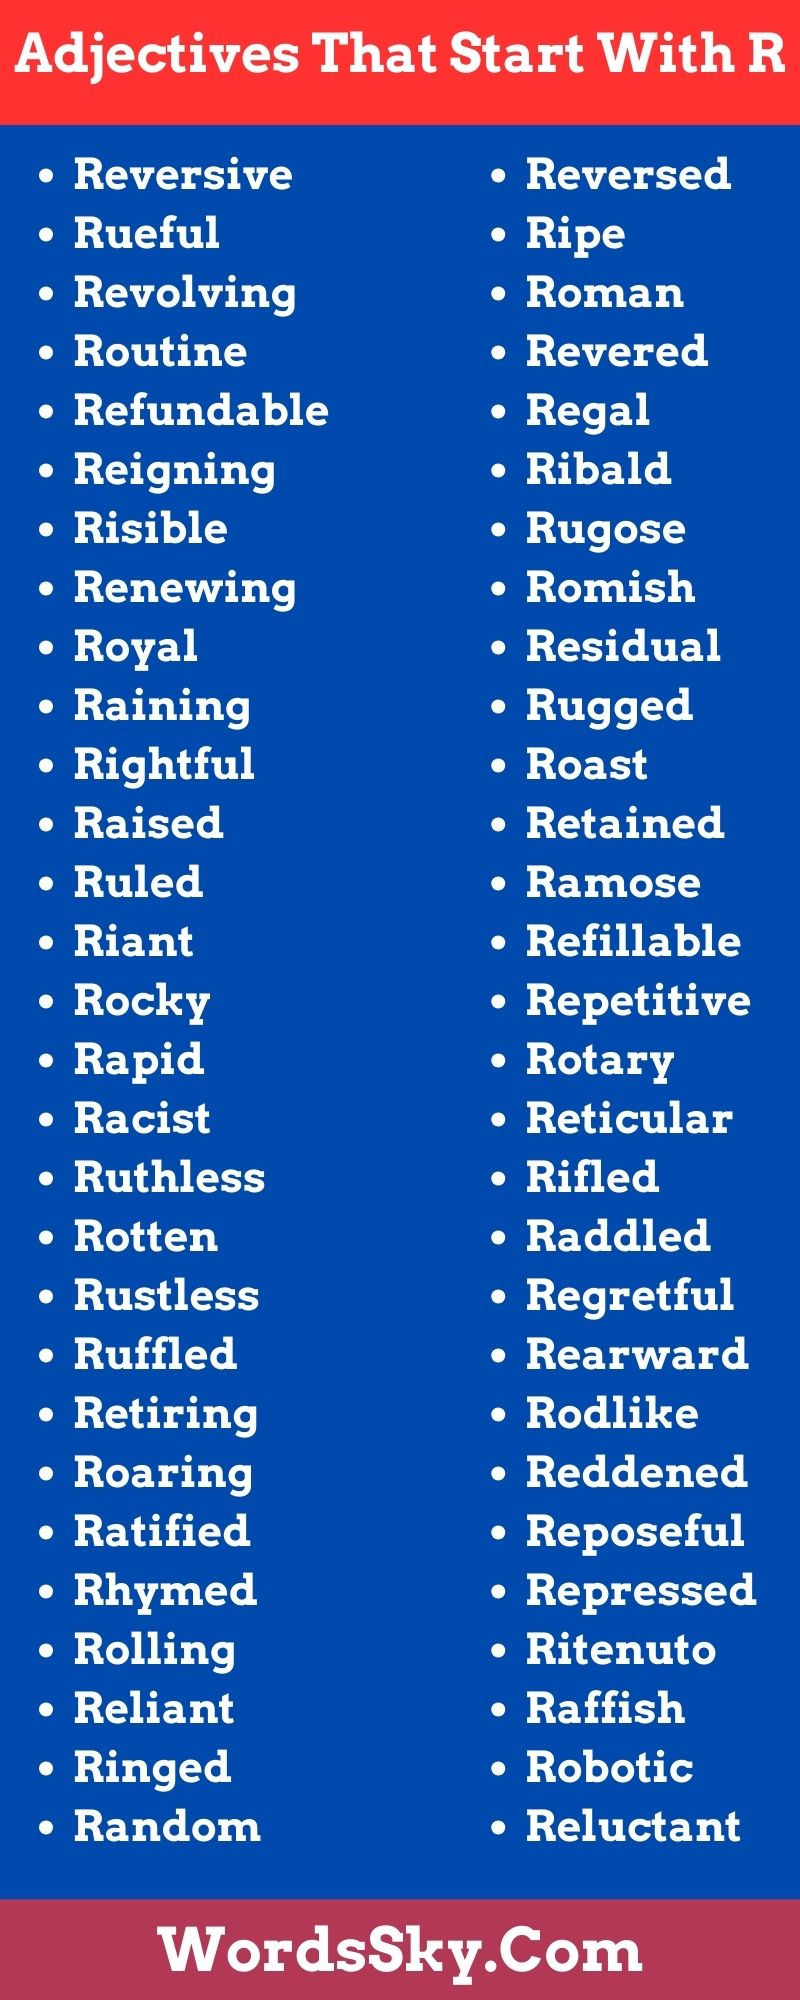 Adjectives That Start With R